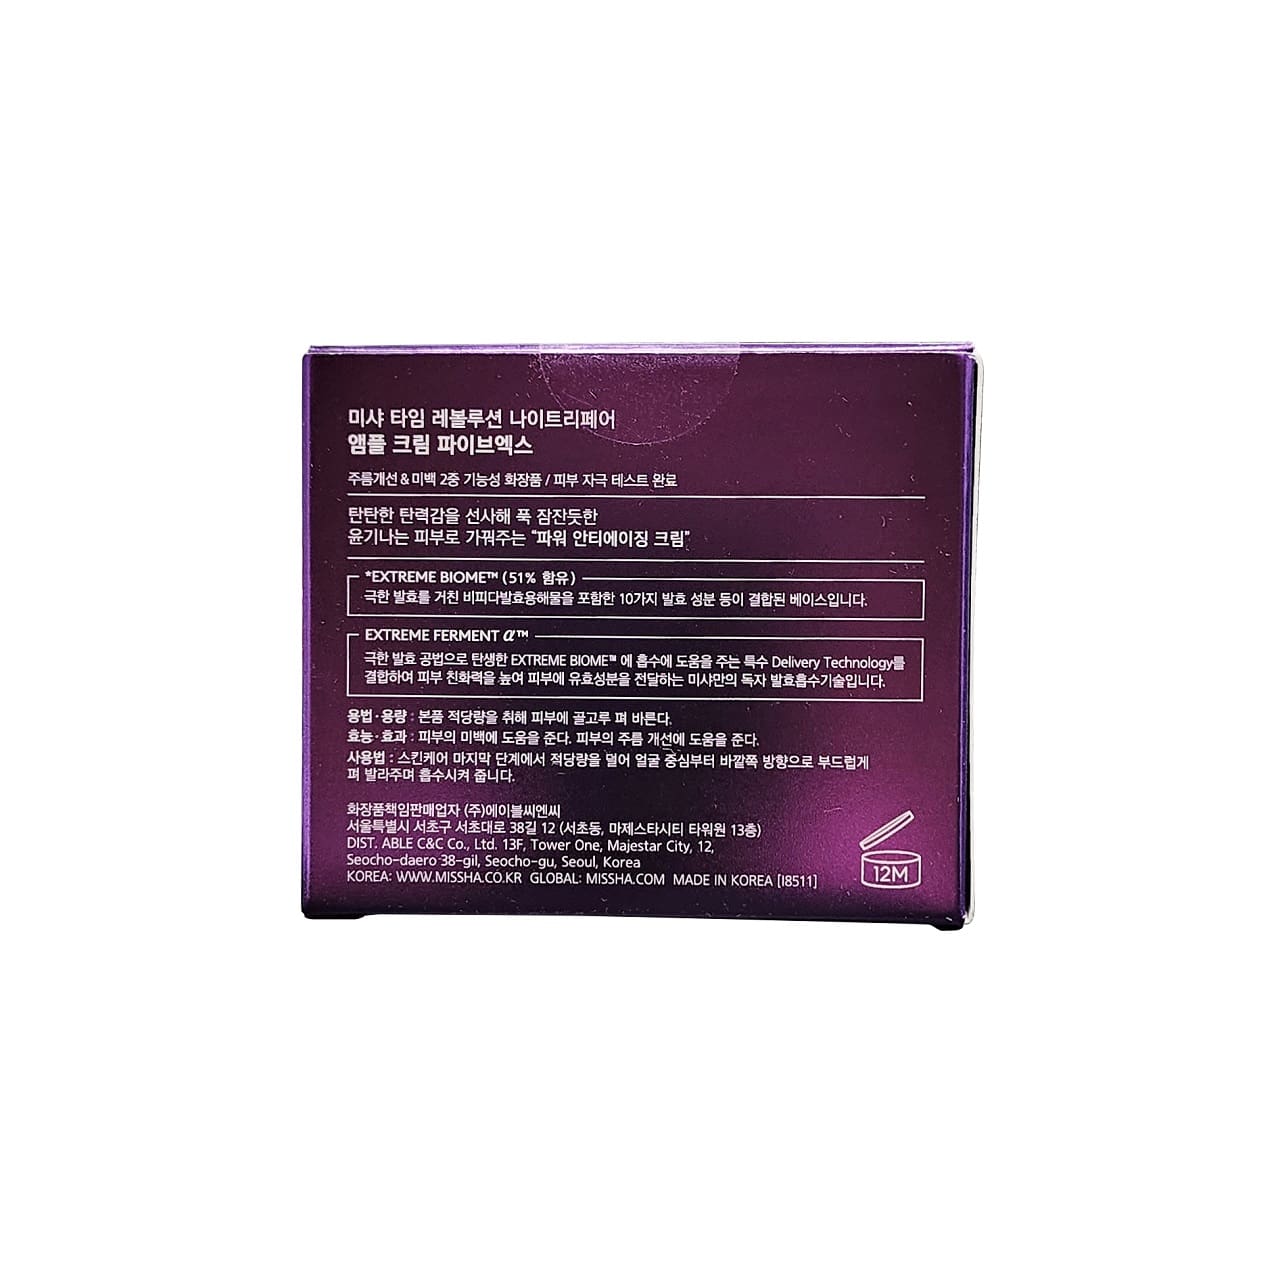 Description, directions, and caution for MISSHA Time Revolution Night Ampoule Cream 5X (50 mL) in French